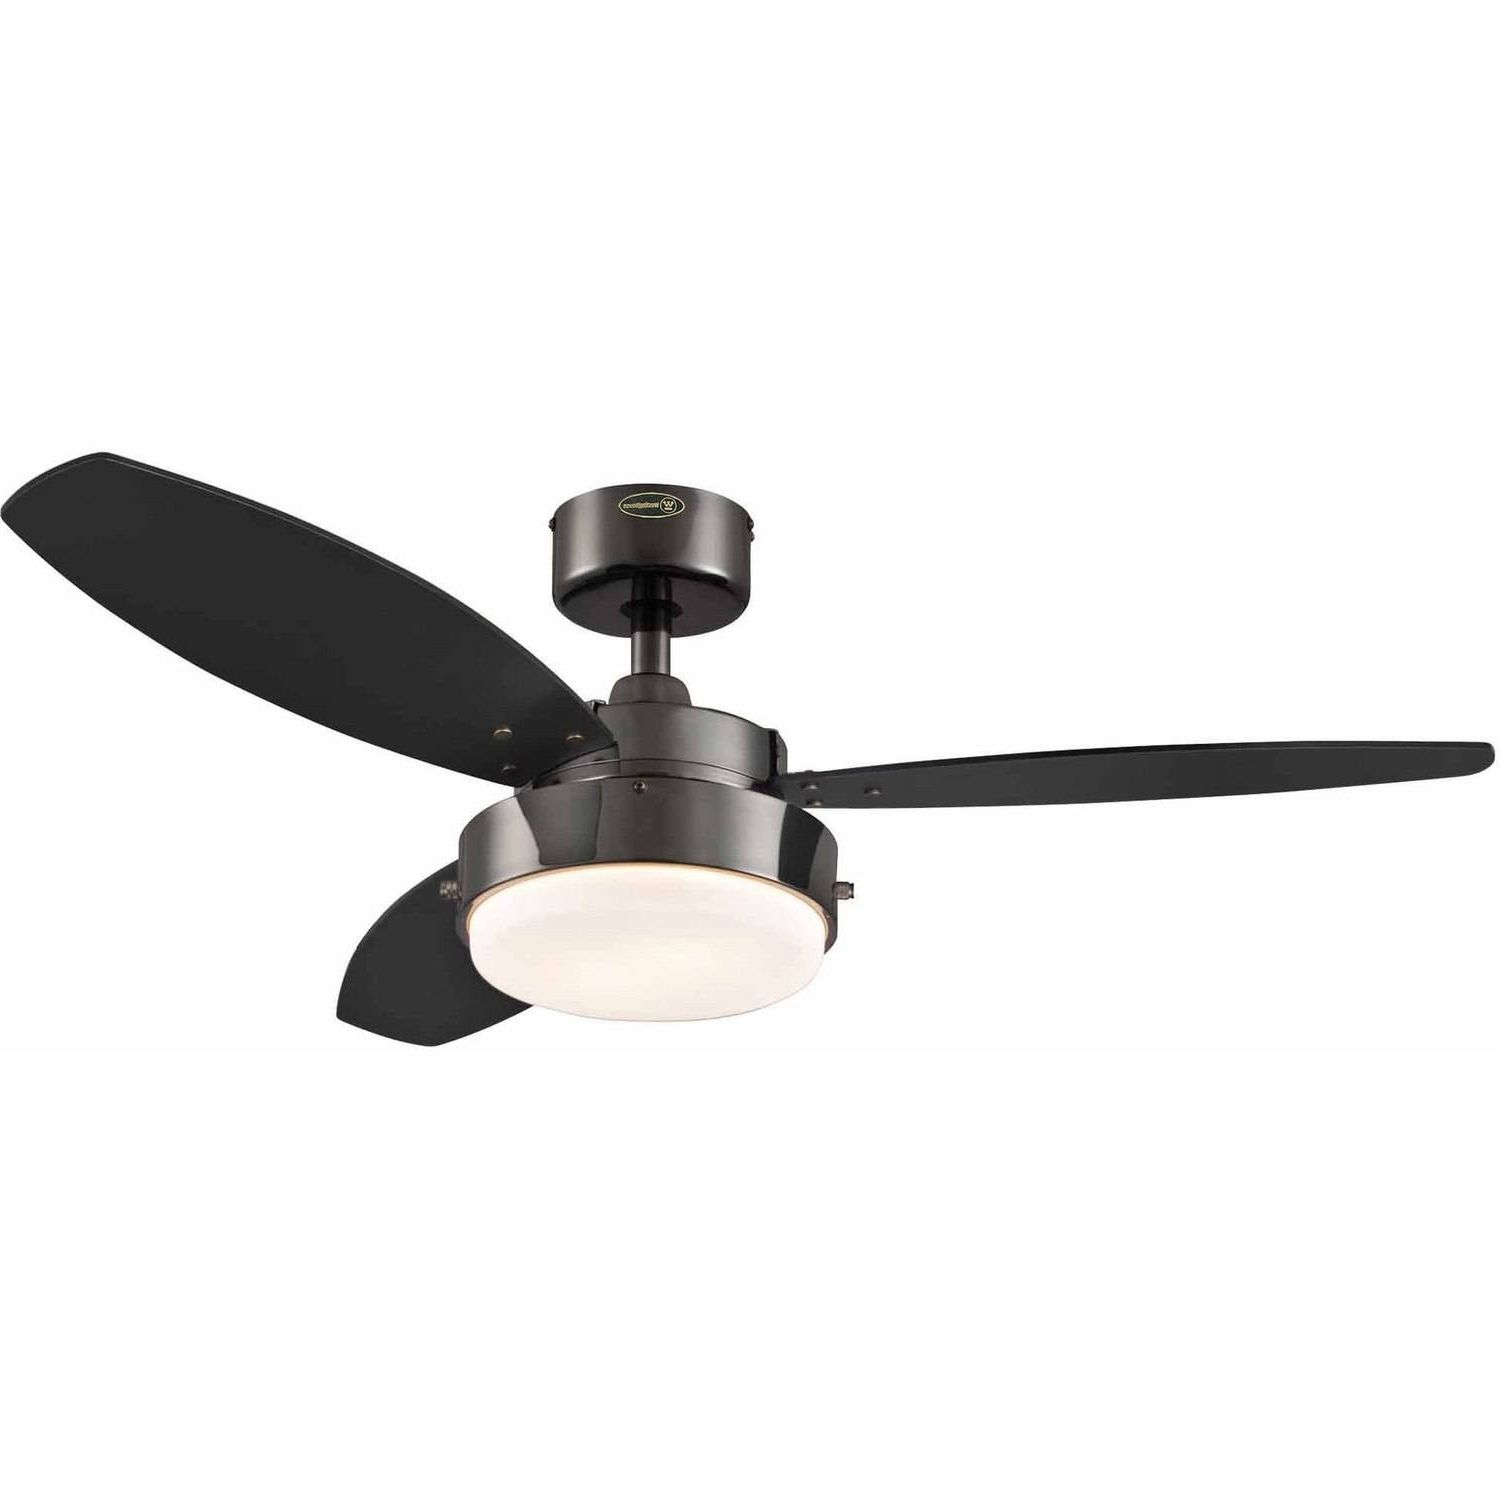 Outdoor Ceiling Fan Lights With Remote Control Within Best And Newest 52" Honeywell Sunset Key Outdoor Ceiling Fan, Bronze – Walmart (View 14 of 20)